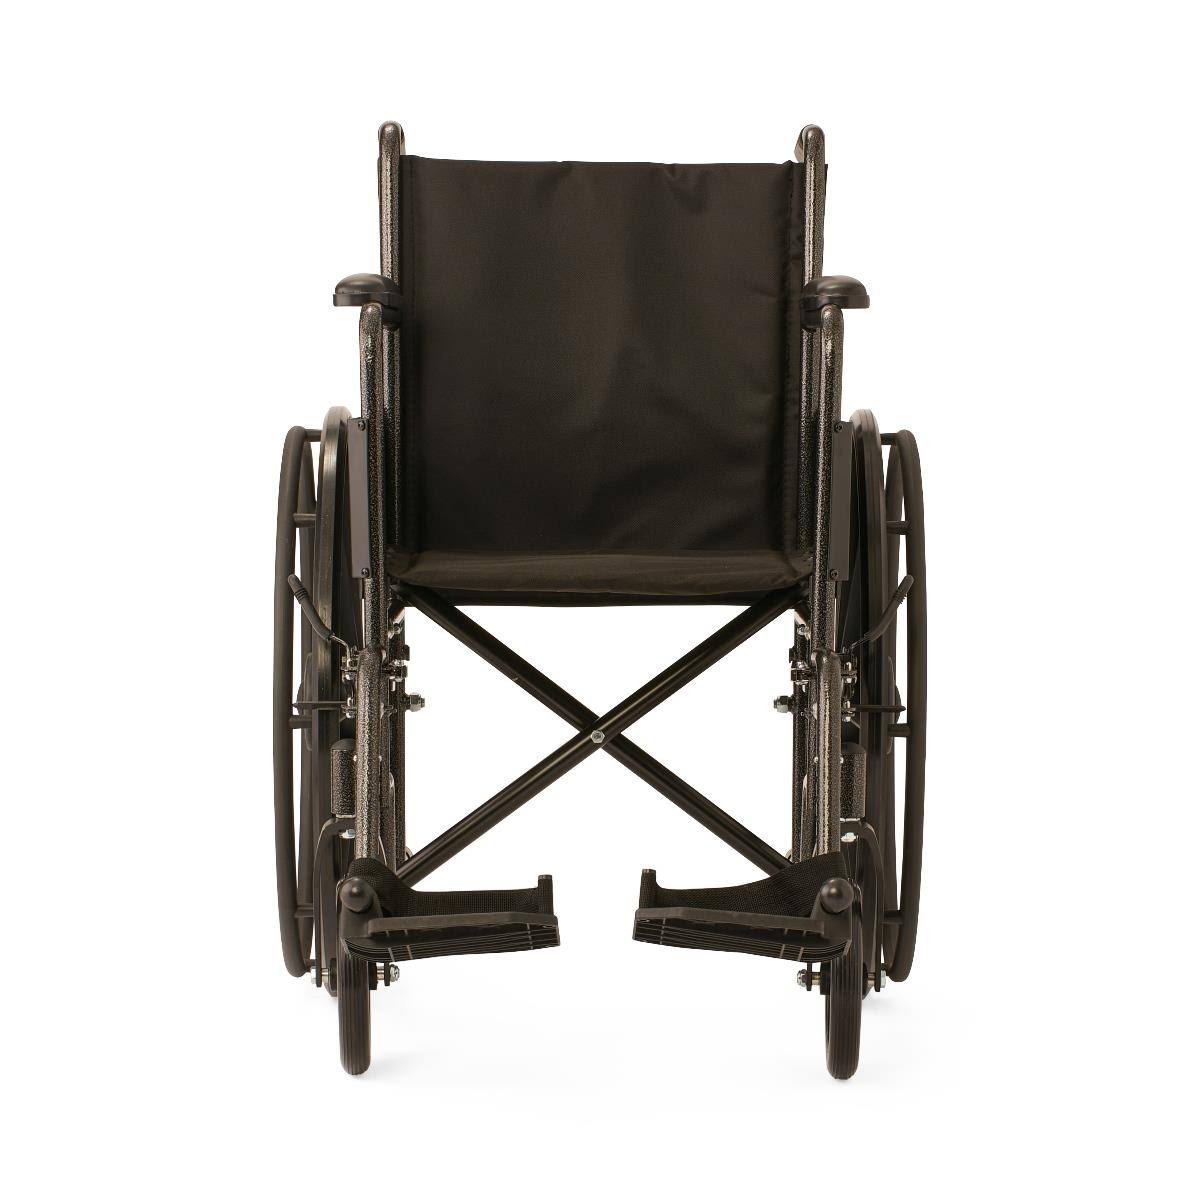 Medline Guardian K1 Wheelchair with Swing-Away Leg Rests,18 Wide Seat and Full-Length Permanent Arms,Each,K1186N13S